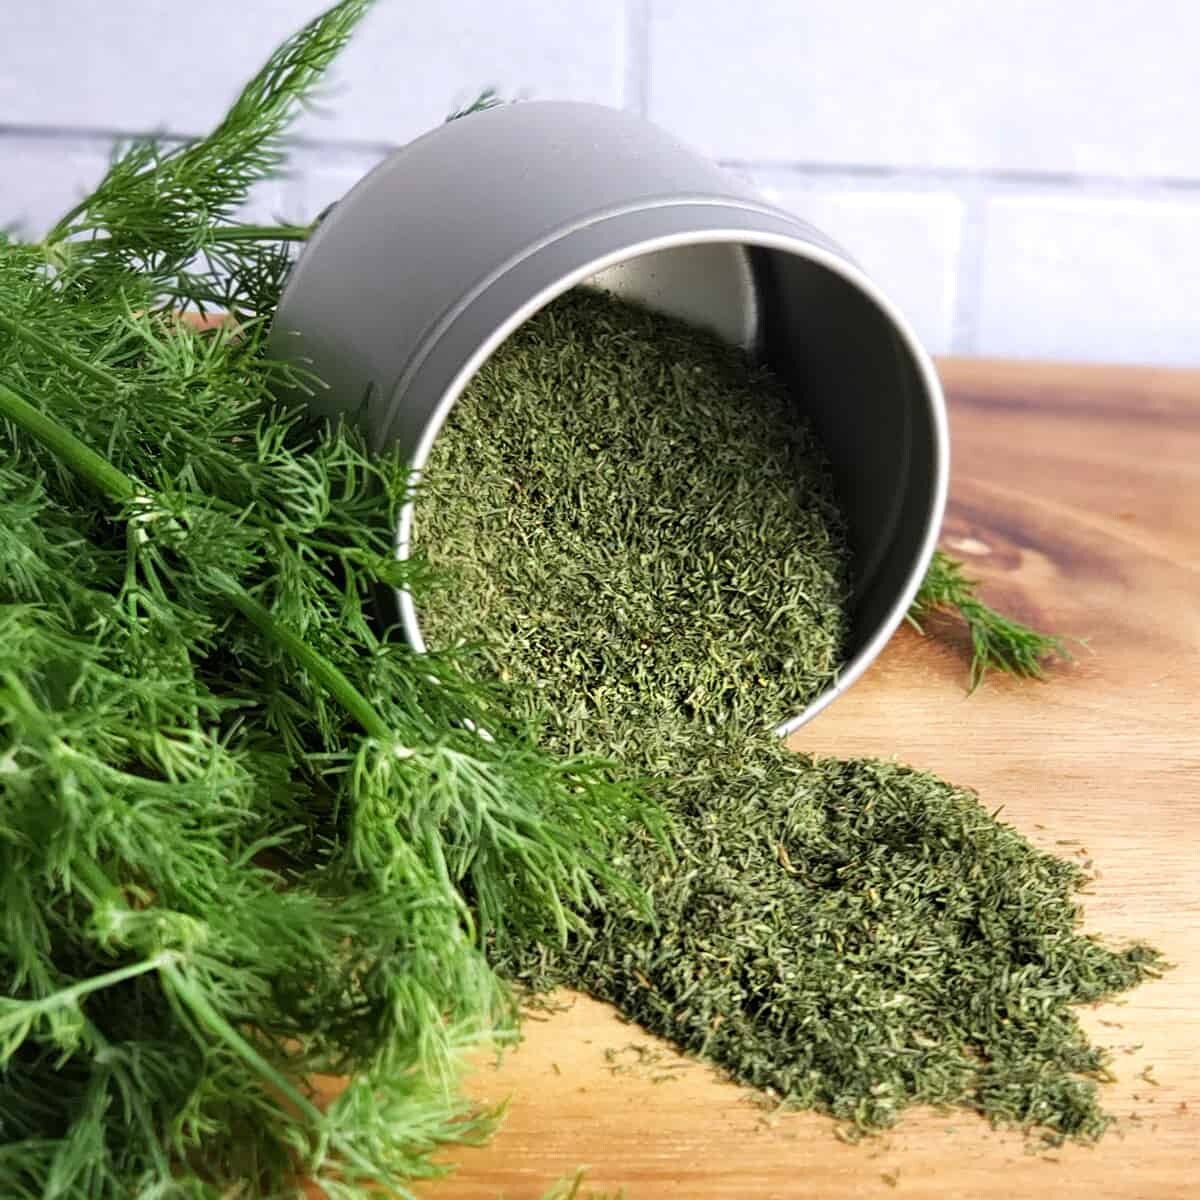 Dill - Herb Seeds